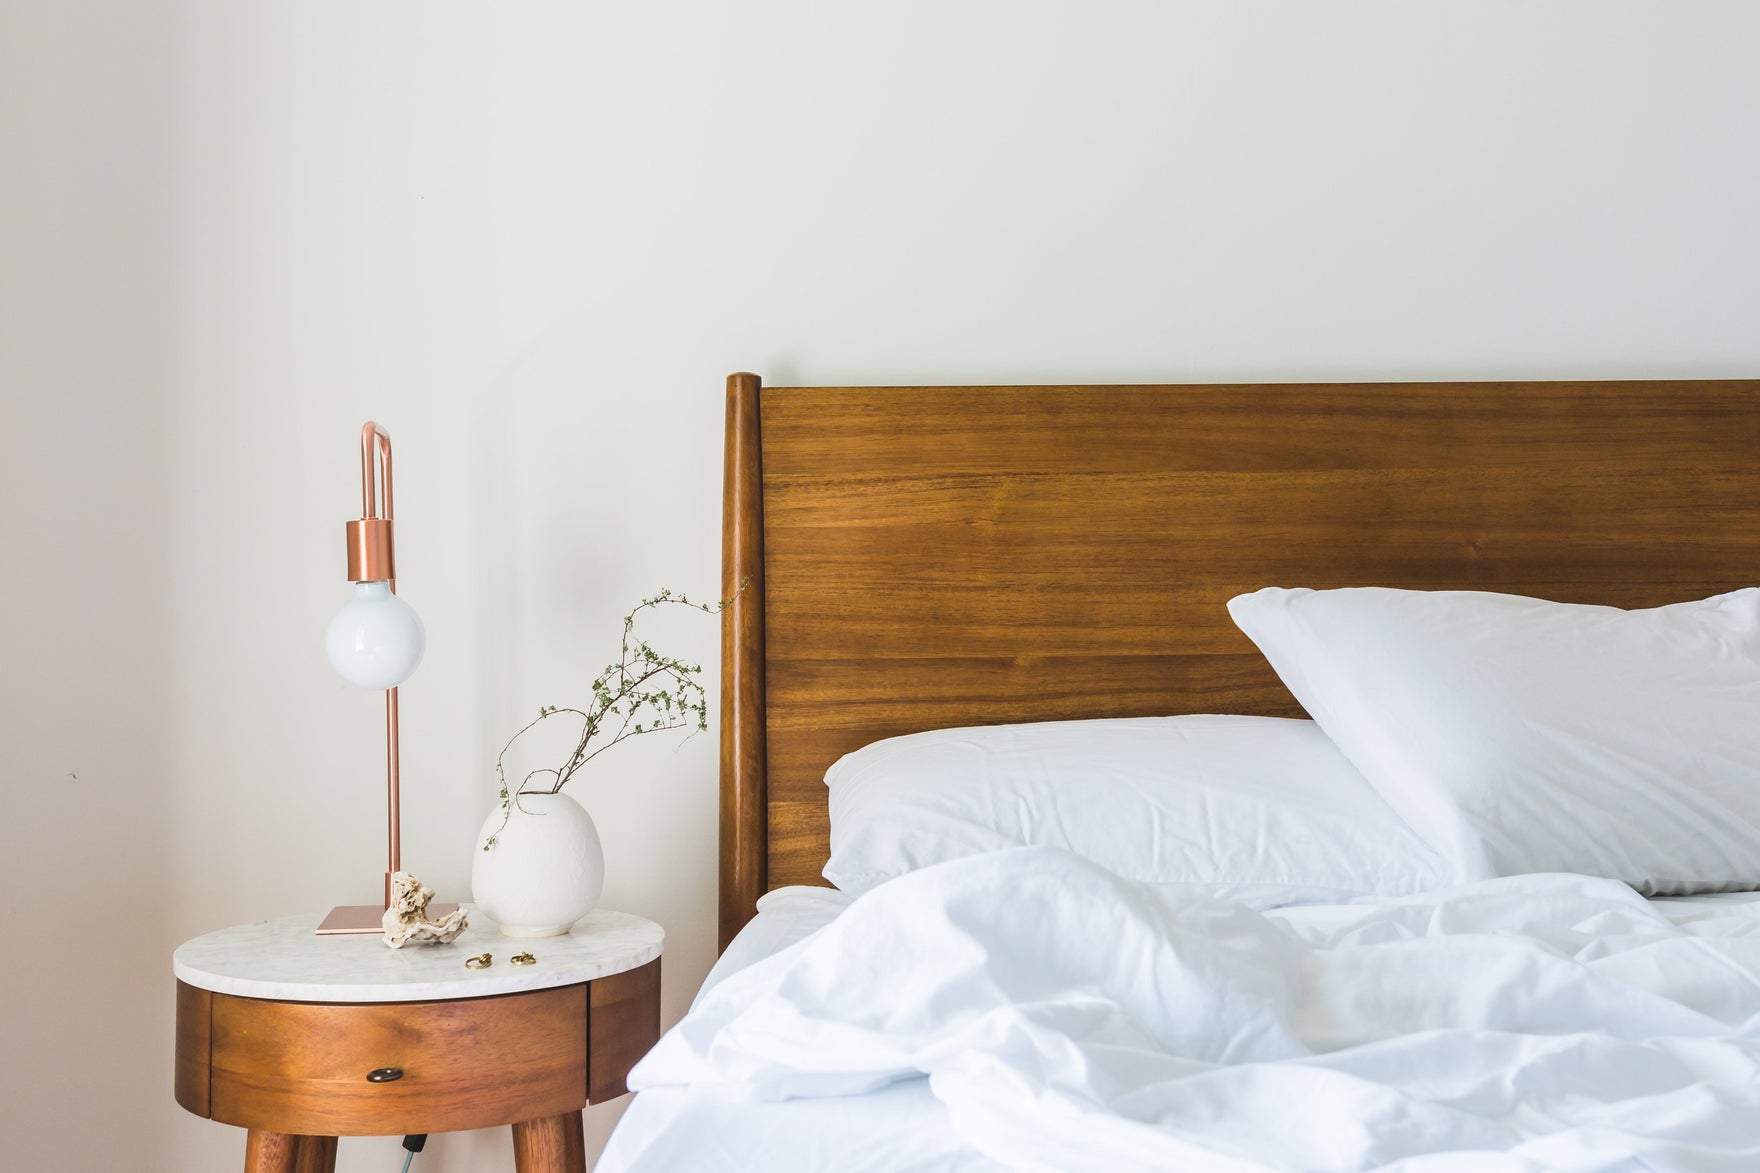 A bed with white sheets and a white bedspread is rumpled next to a white and brown wood nightstand